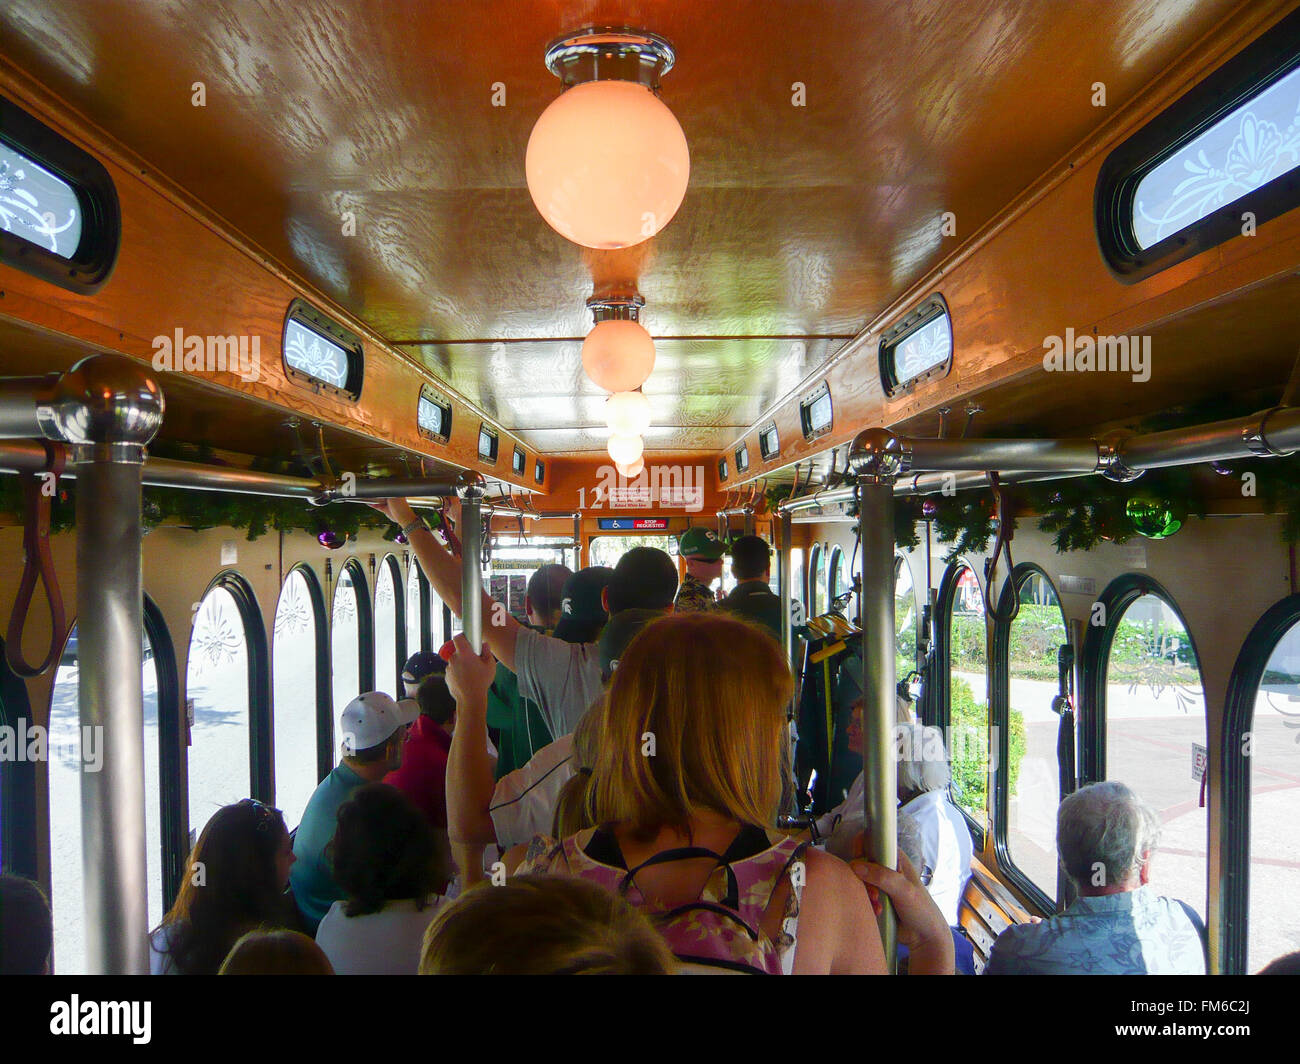 Passengers packed into the I-Drive Trolley bus which runs on International Drive, Orlando, Florida Stock Photo